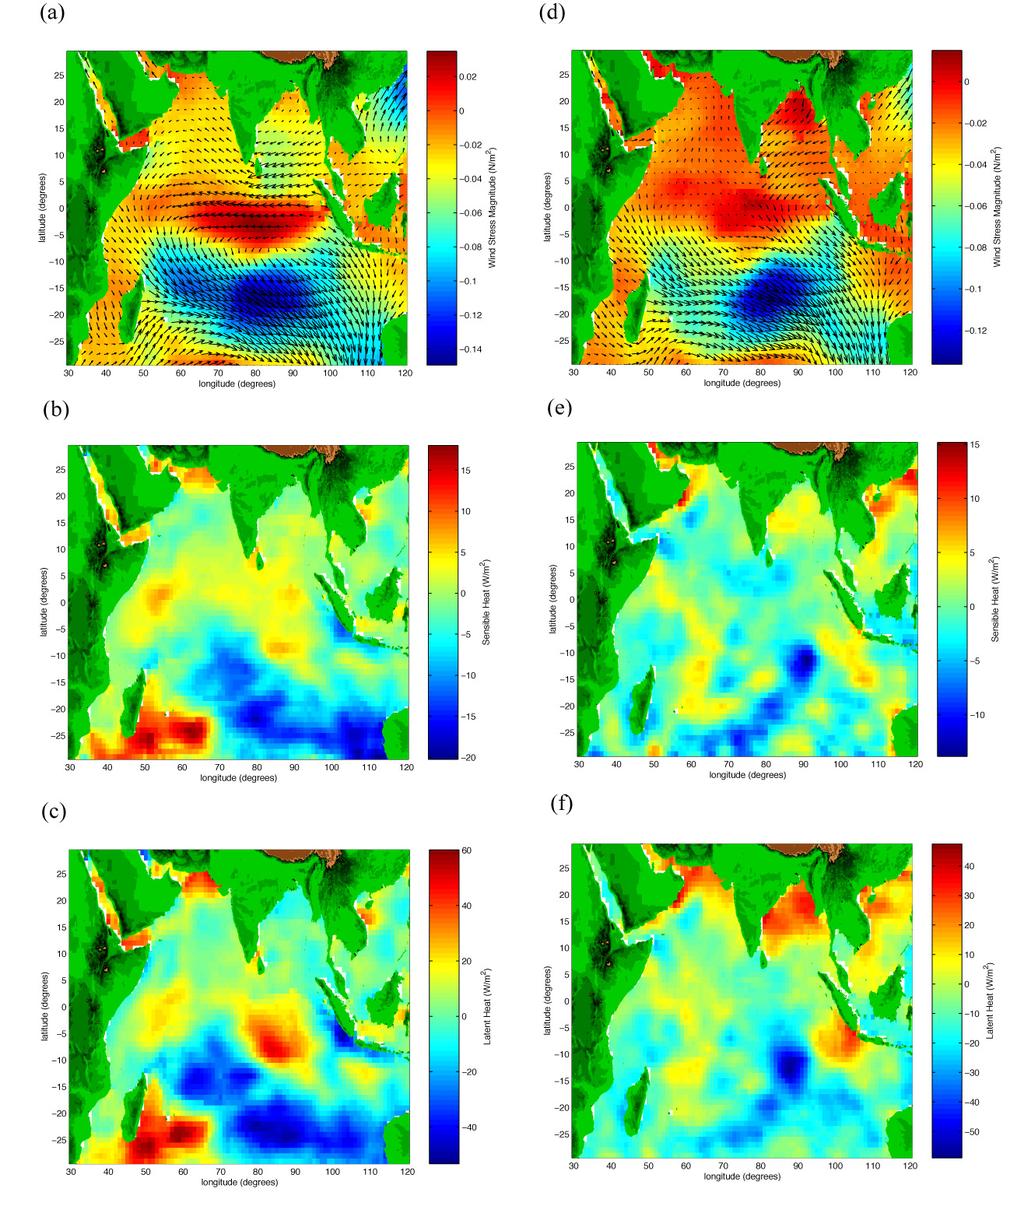 FIG. 15 Observed SON composite anomalies during the 1997 positive Indian Ocean Dipole (IOD) mode event (a)-(c) and the 1993 negative IOD event